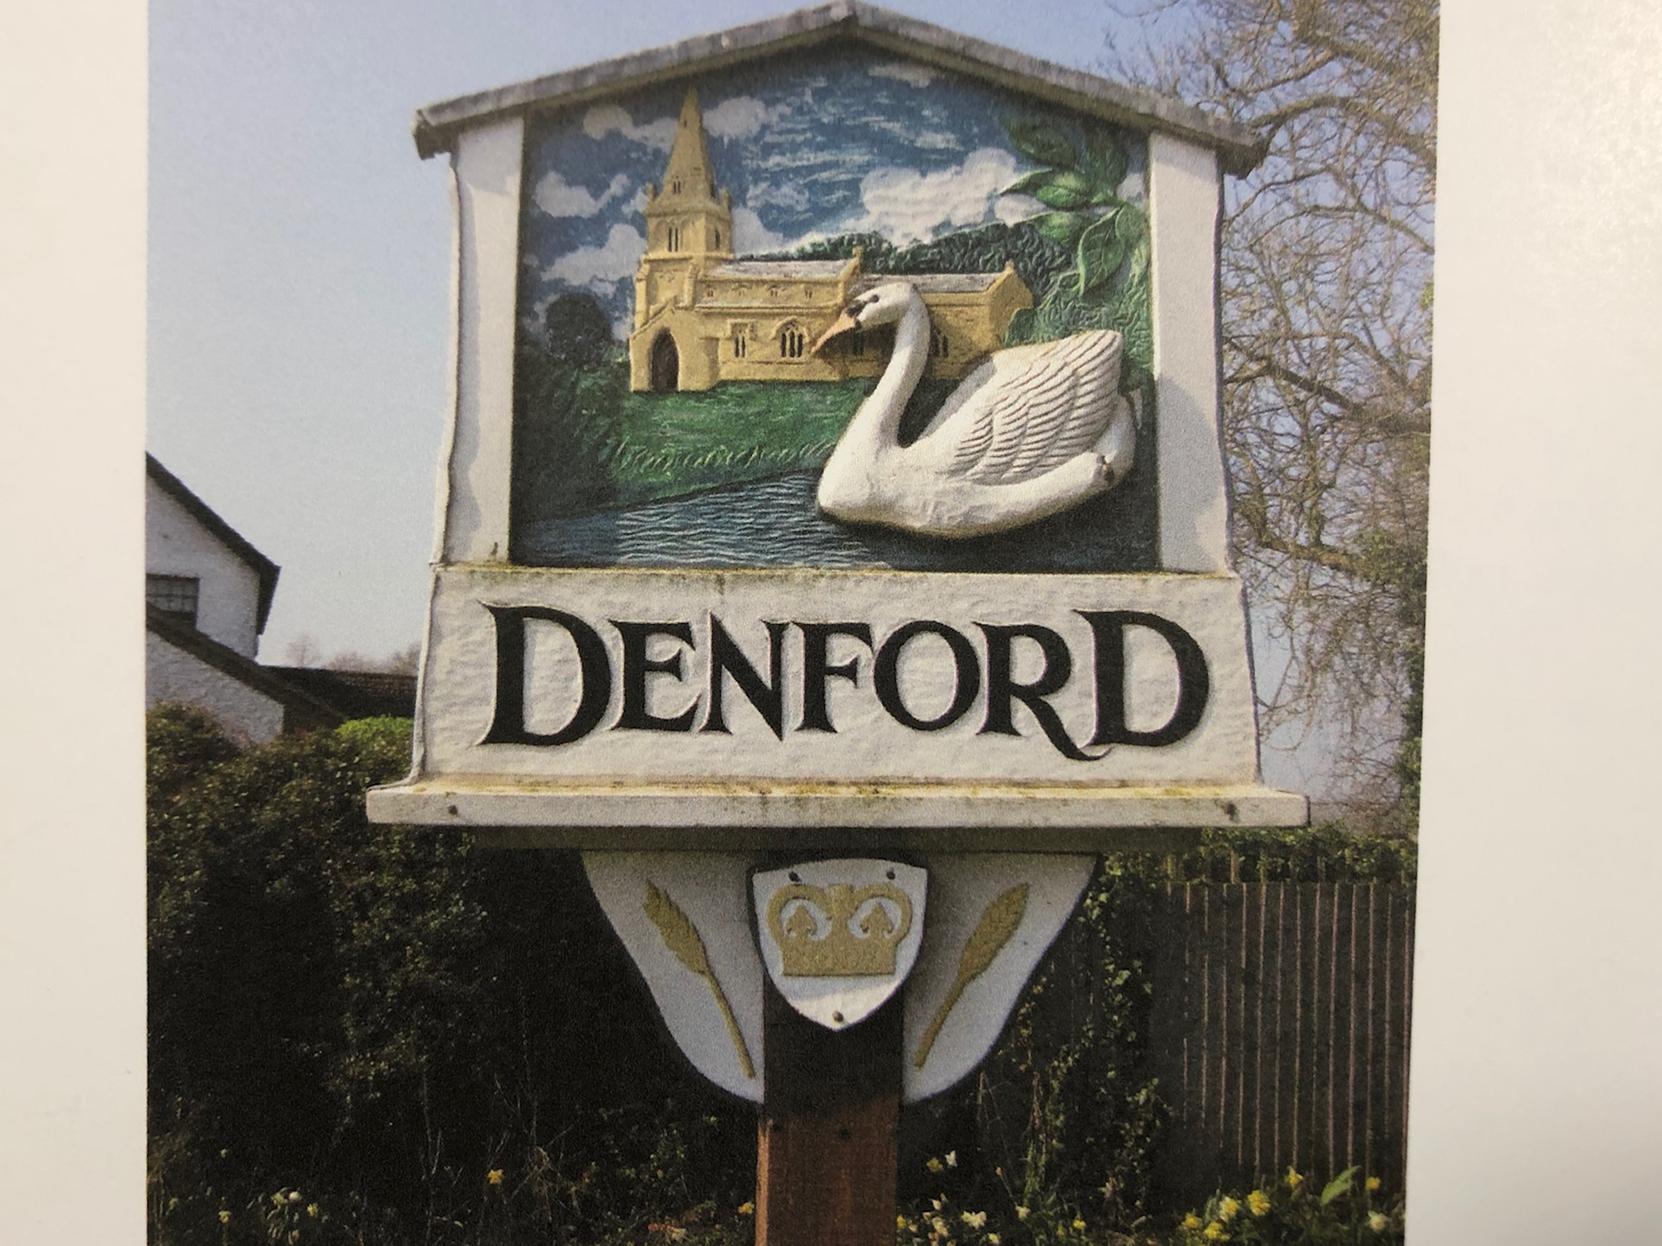 A blacksmith who cannot leave his old shop is said to haunt The Cock in Denford, as well as a lady in white attire who locks the toilet doors and steals vital pieces of equipment from the kitchen.